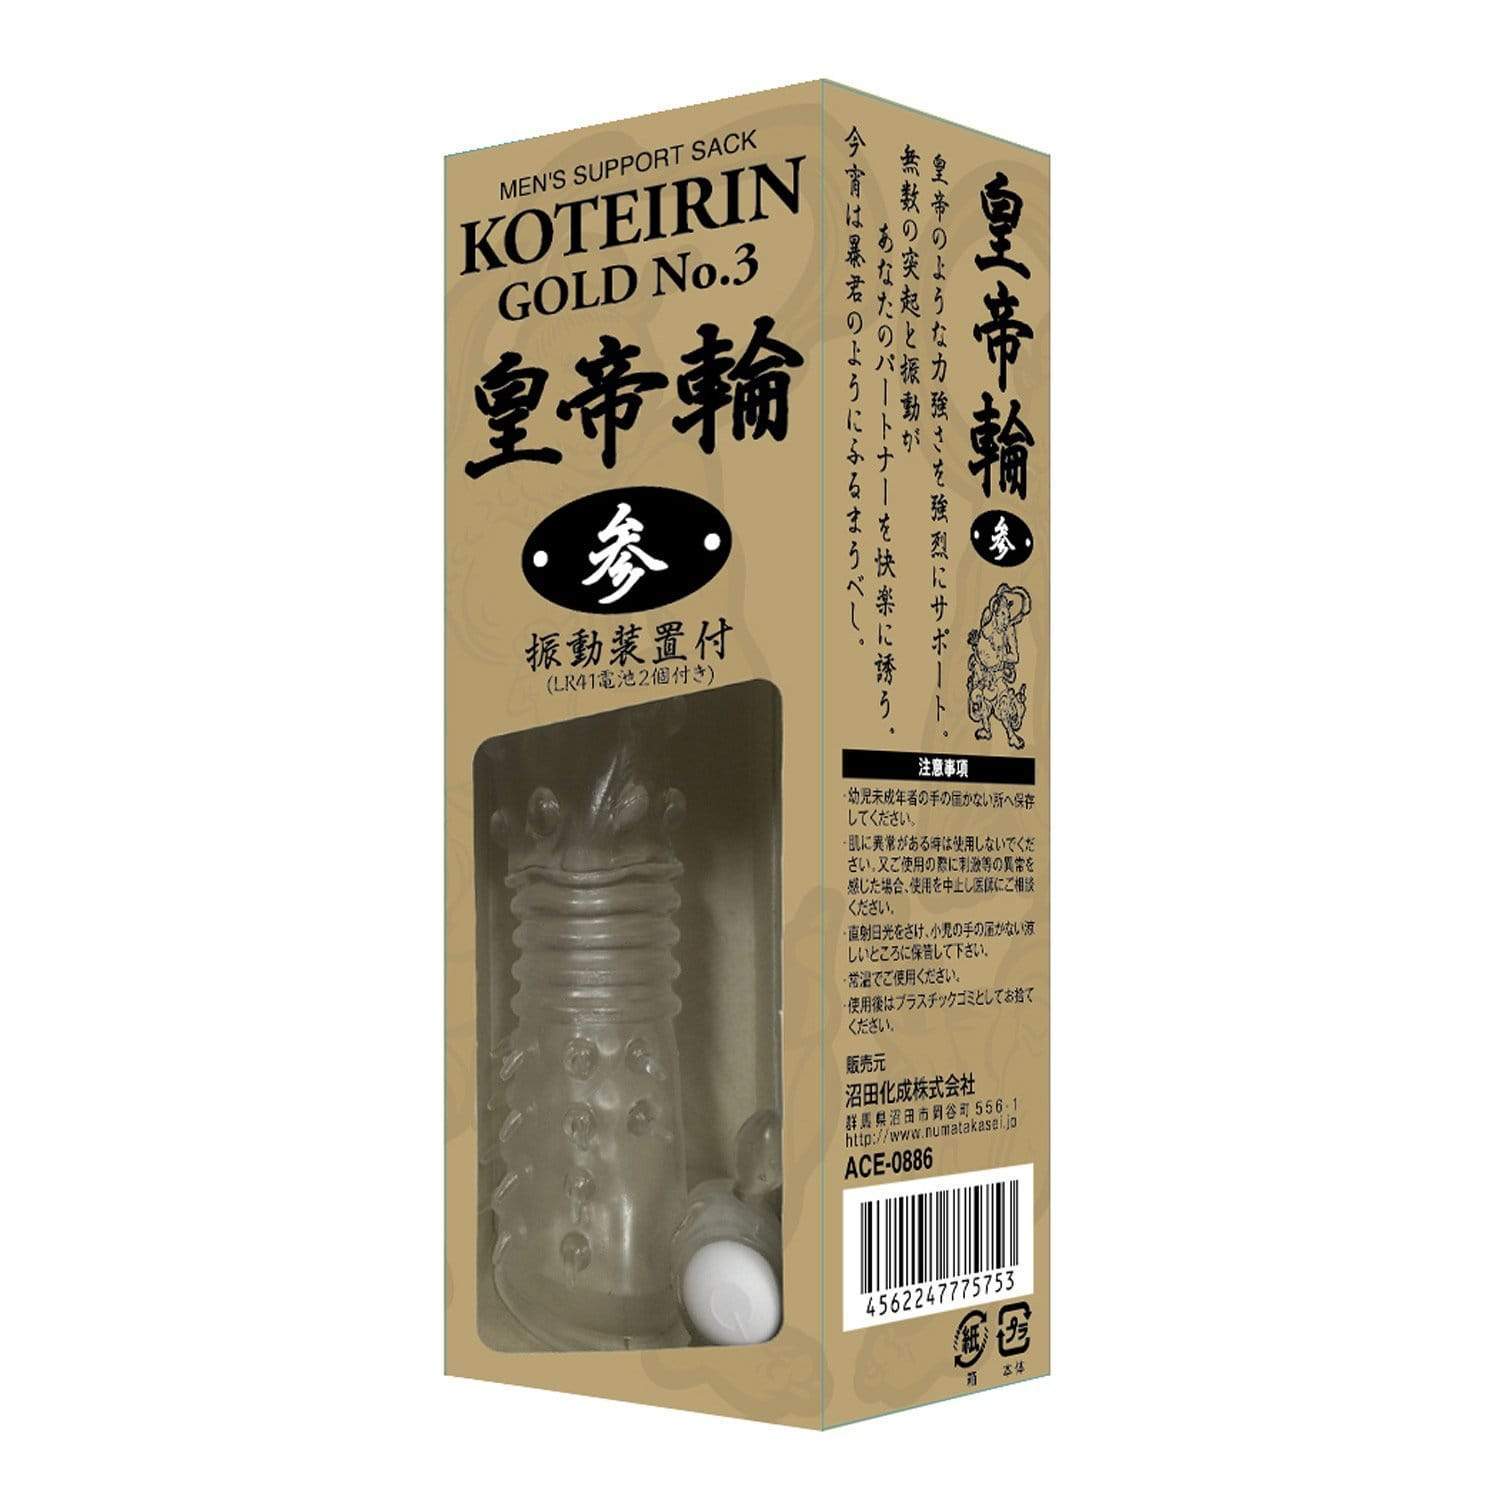 NPG - Men's Support Sack Koteirin Gold No.3 Emperor Worshiper Vibrating Cock Sleeve (Clear) Cock Sleeves (Vibration) Non Rechargeable 4562247775753 CherryAffairs